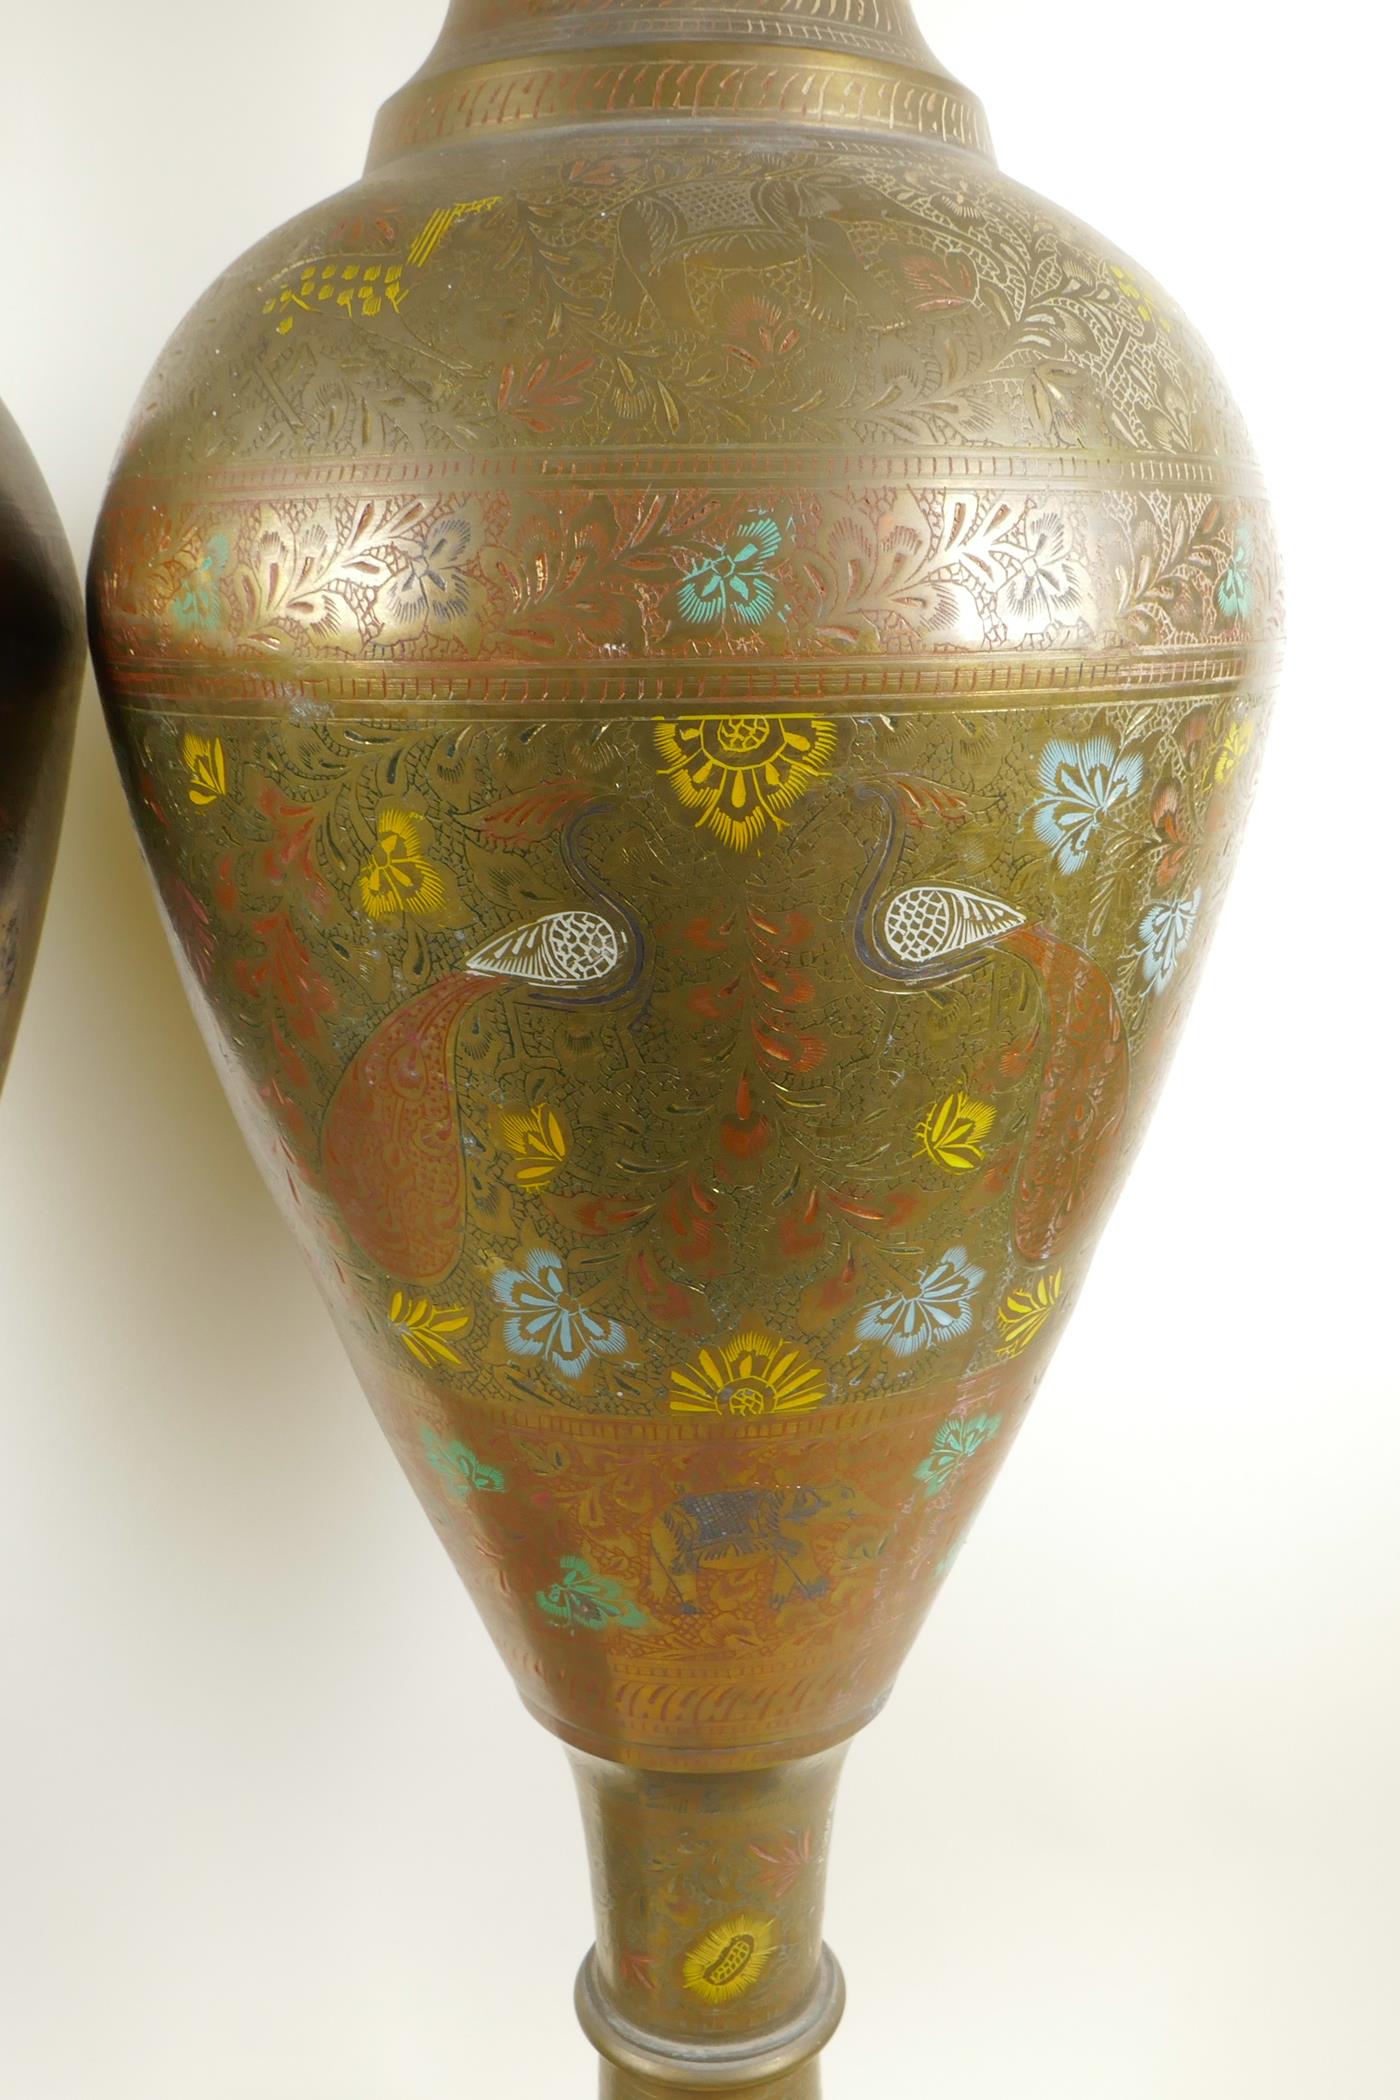 A pair of large Indian brass floor vases with engraved and painted decoration depicting peacocks, - Image 8 of 9